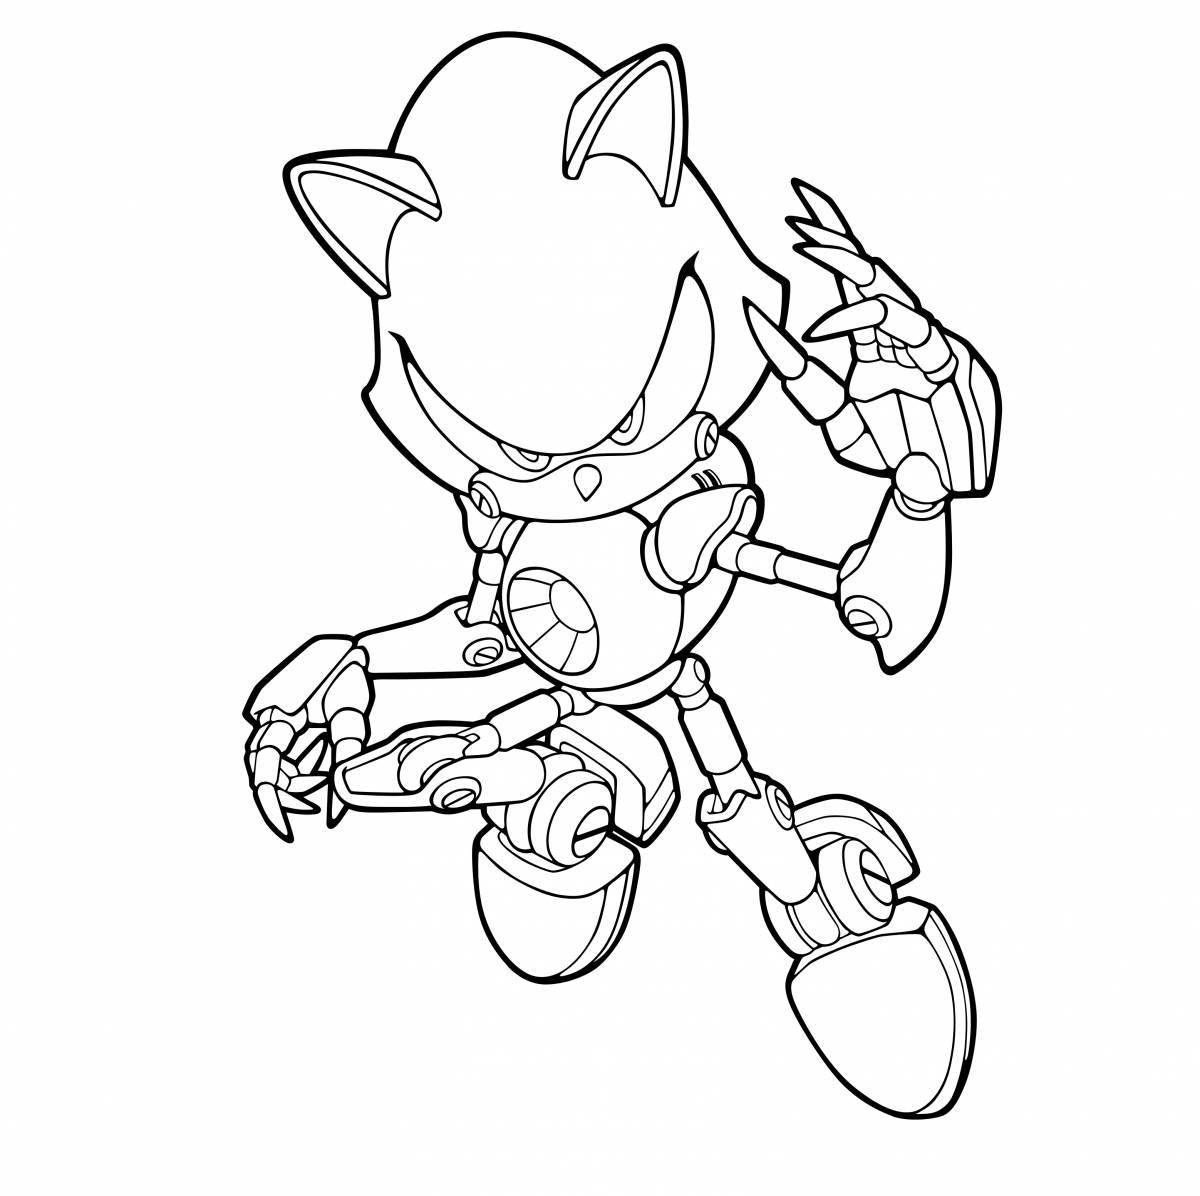 Metal sonic stylish coloring book